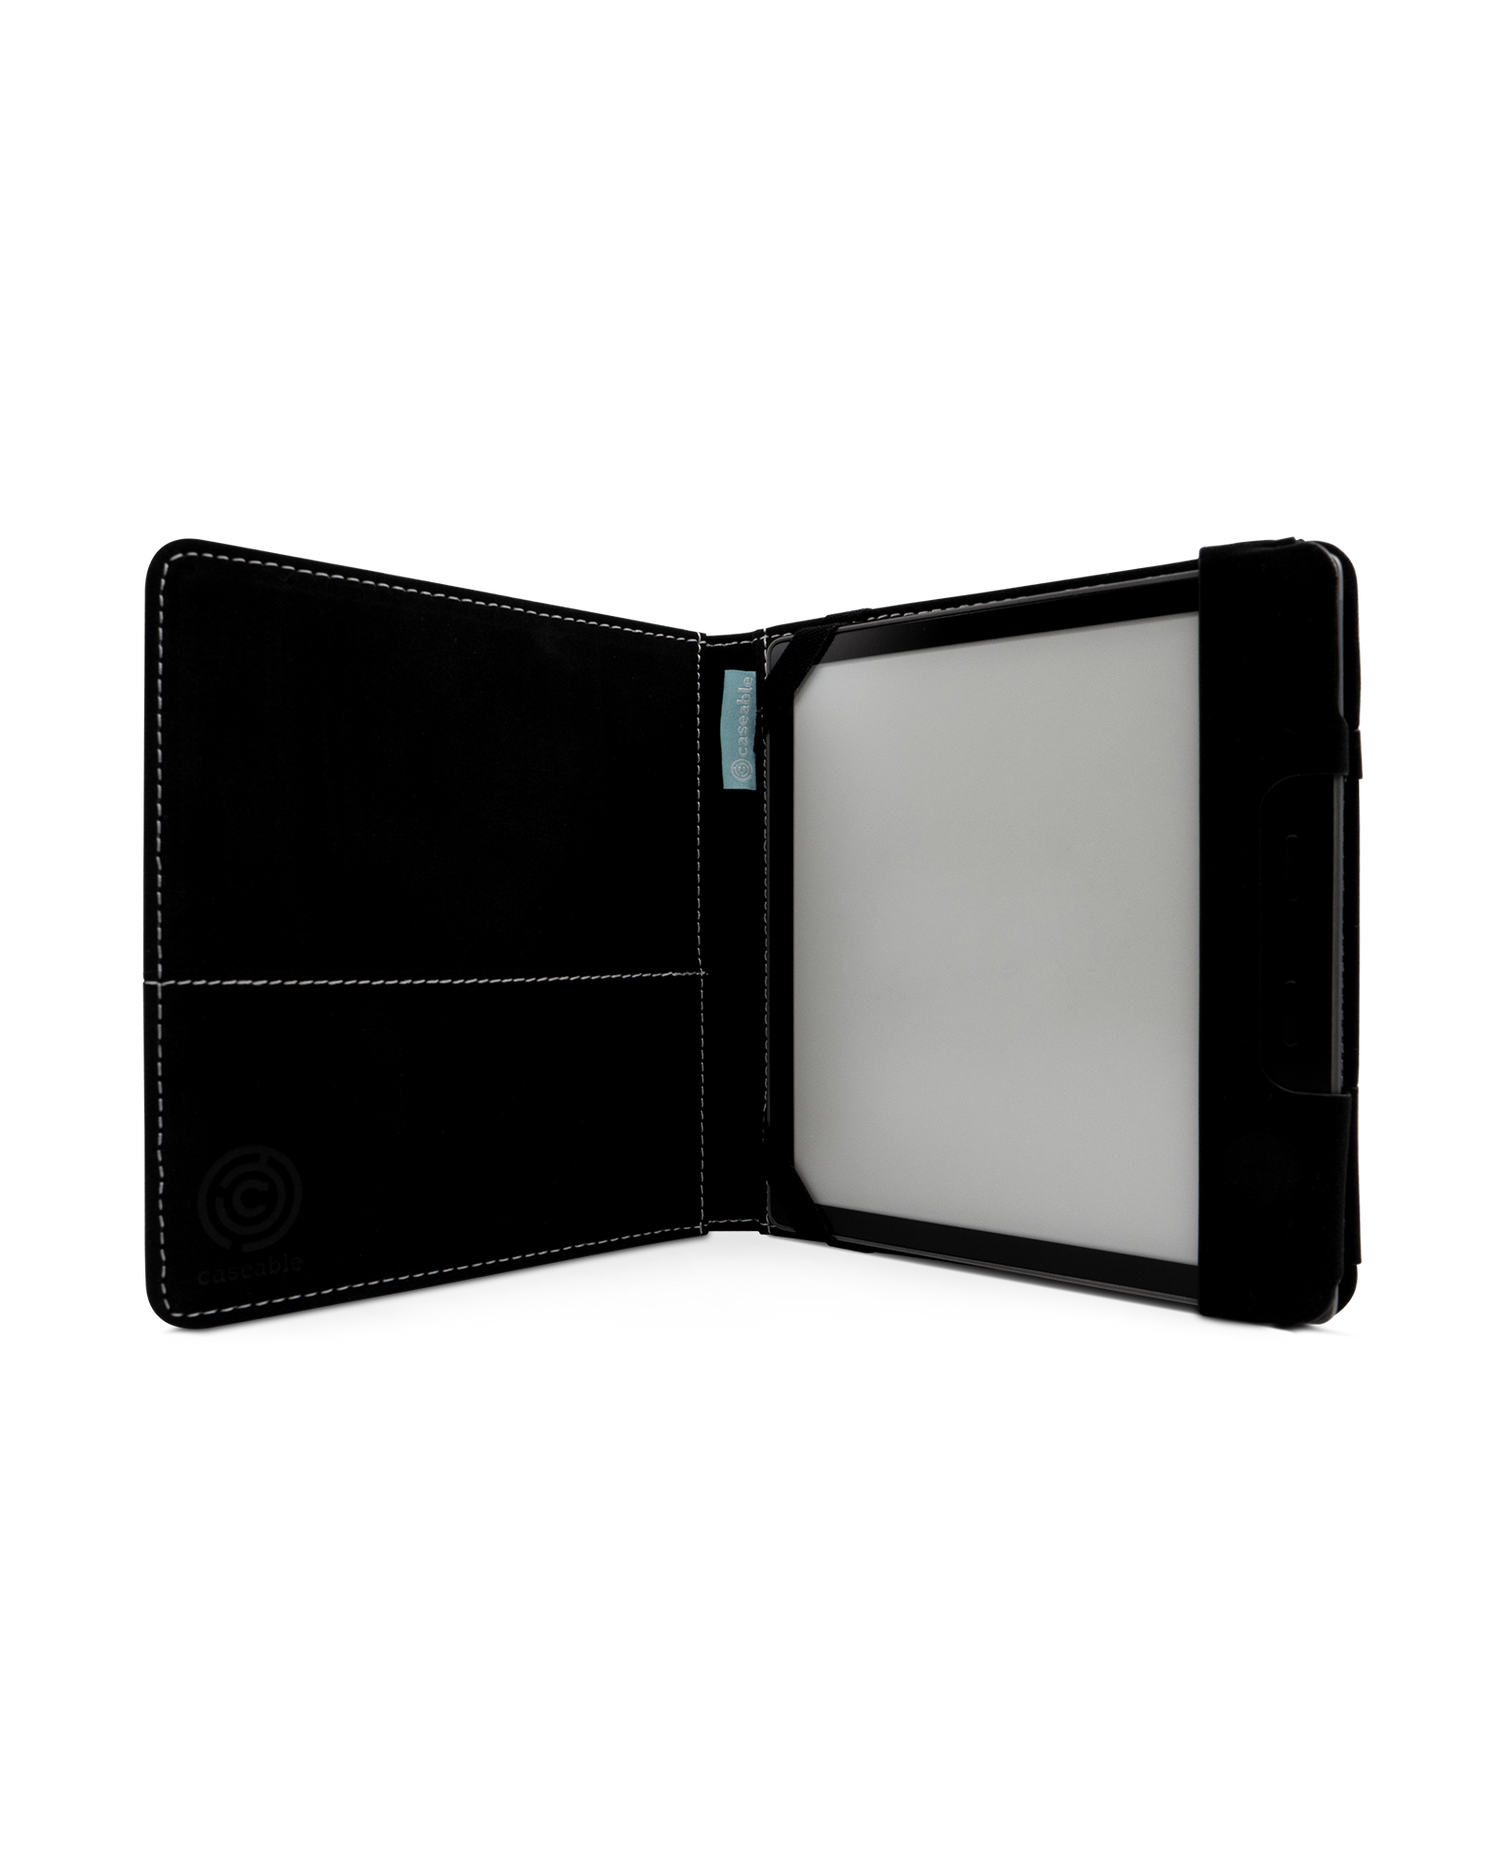 TURQUOISE eReader Case for tolino vision 6: Opened interior view